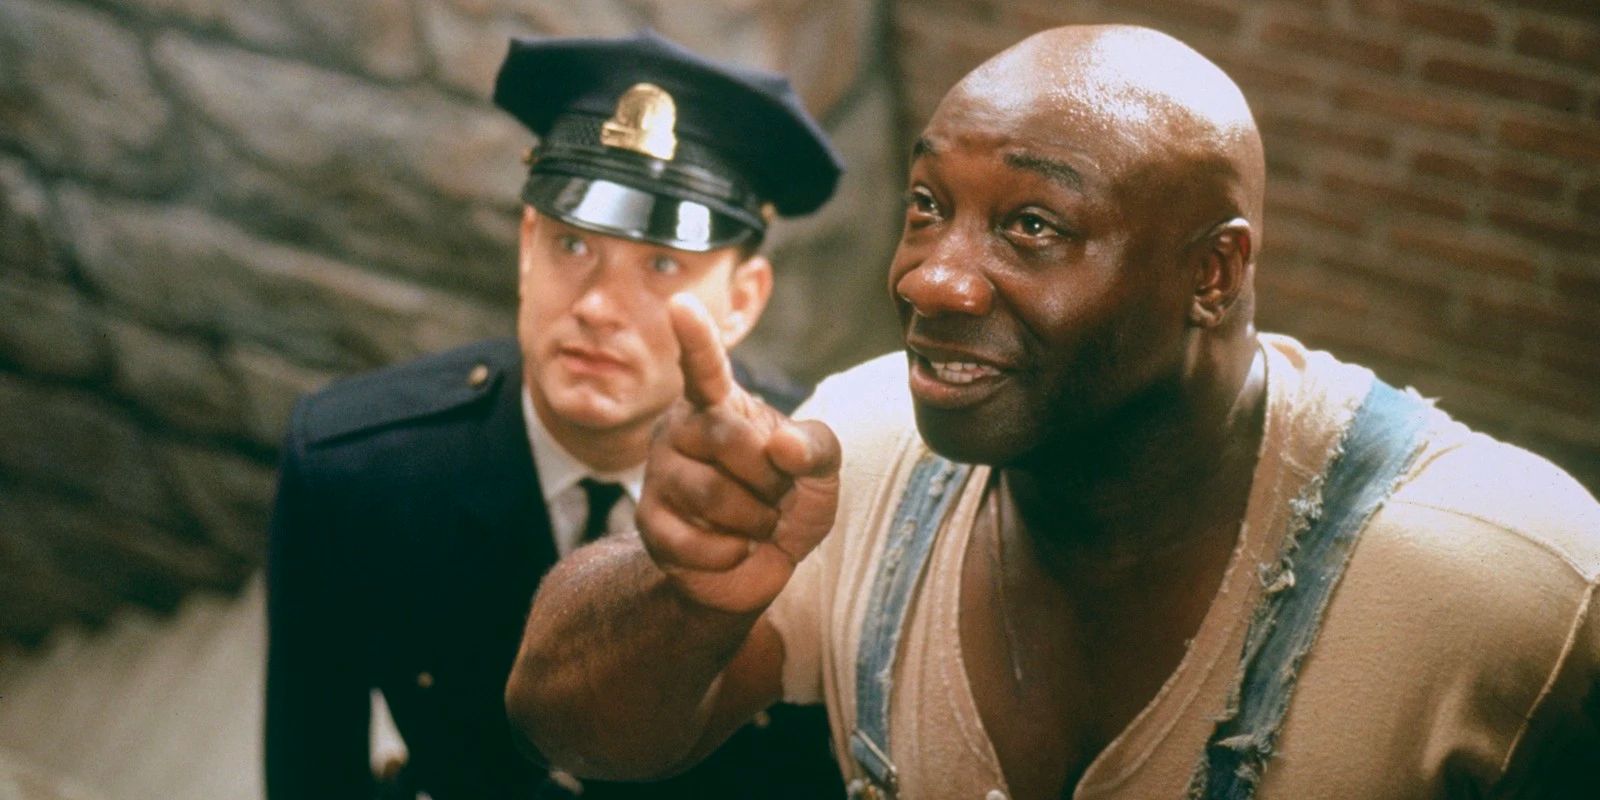 John Coffey (Michael Clarke Duncan) smiling and point upward while Paul Edgecomb (Tom Hanks) watches in The Green Mile